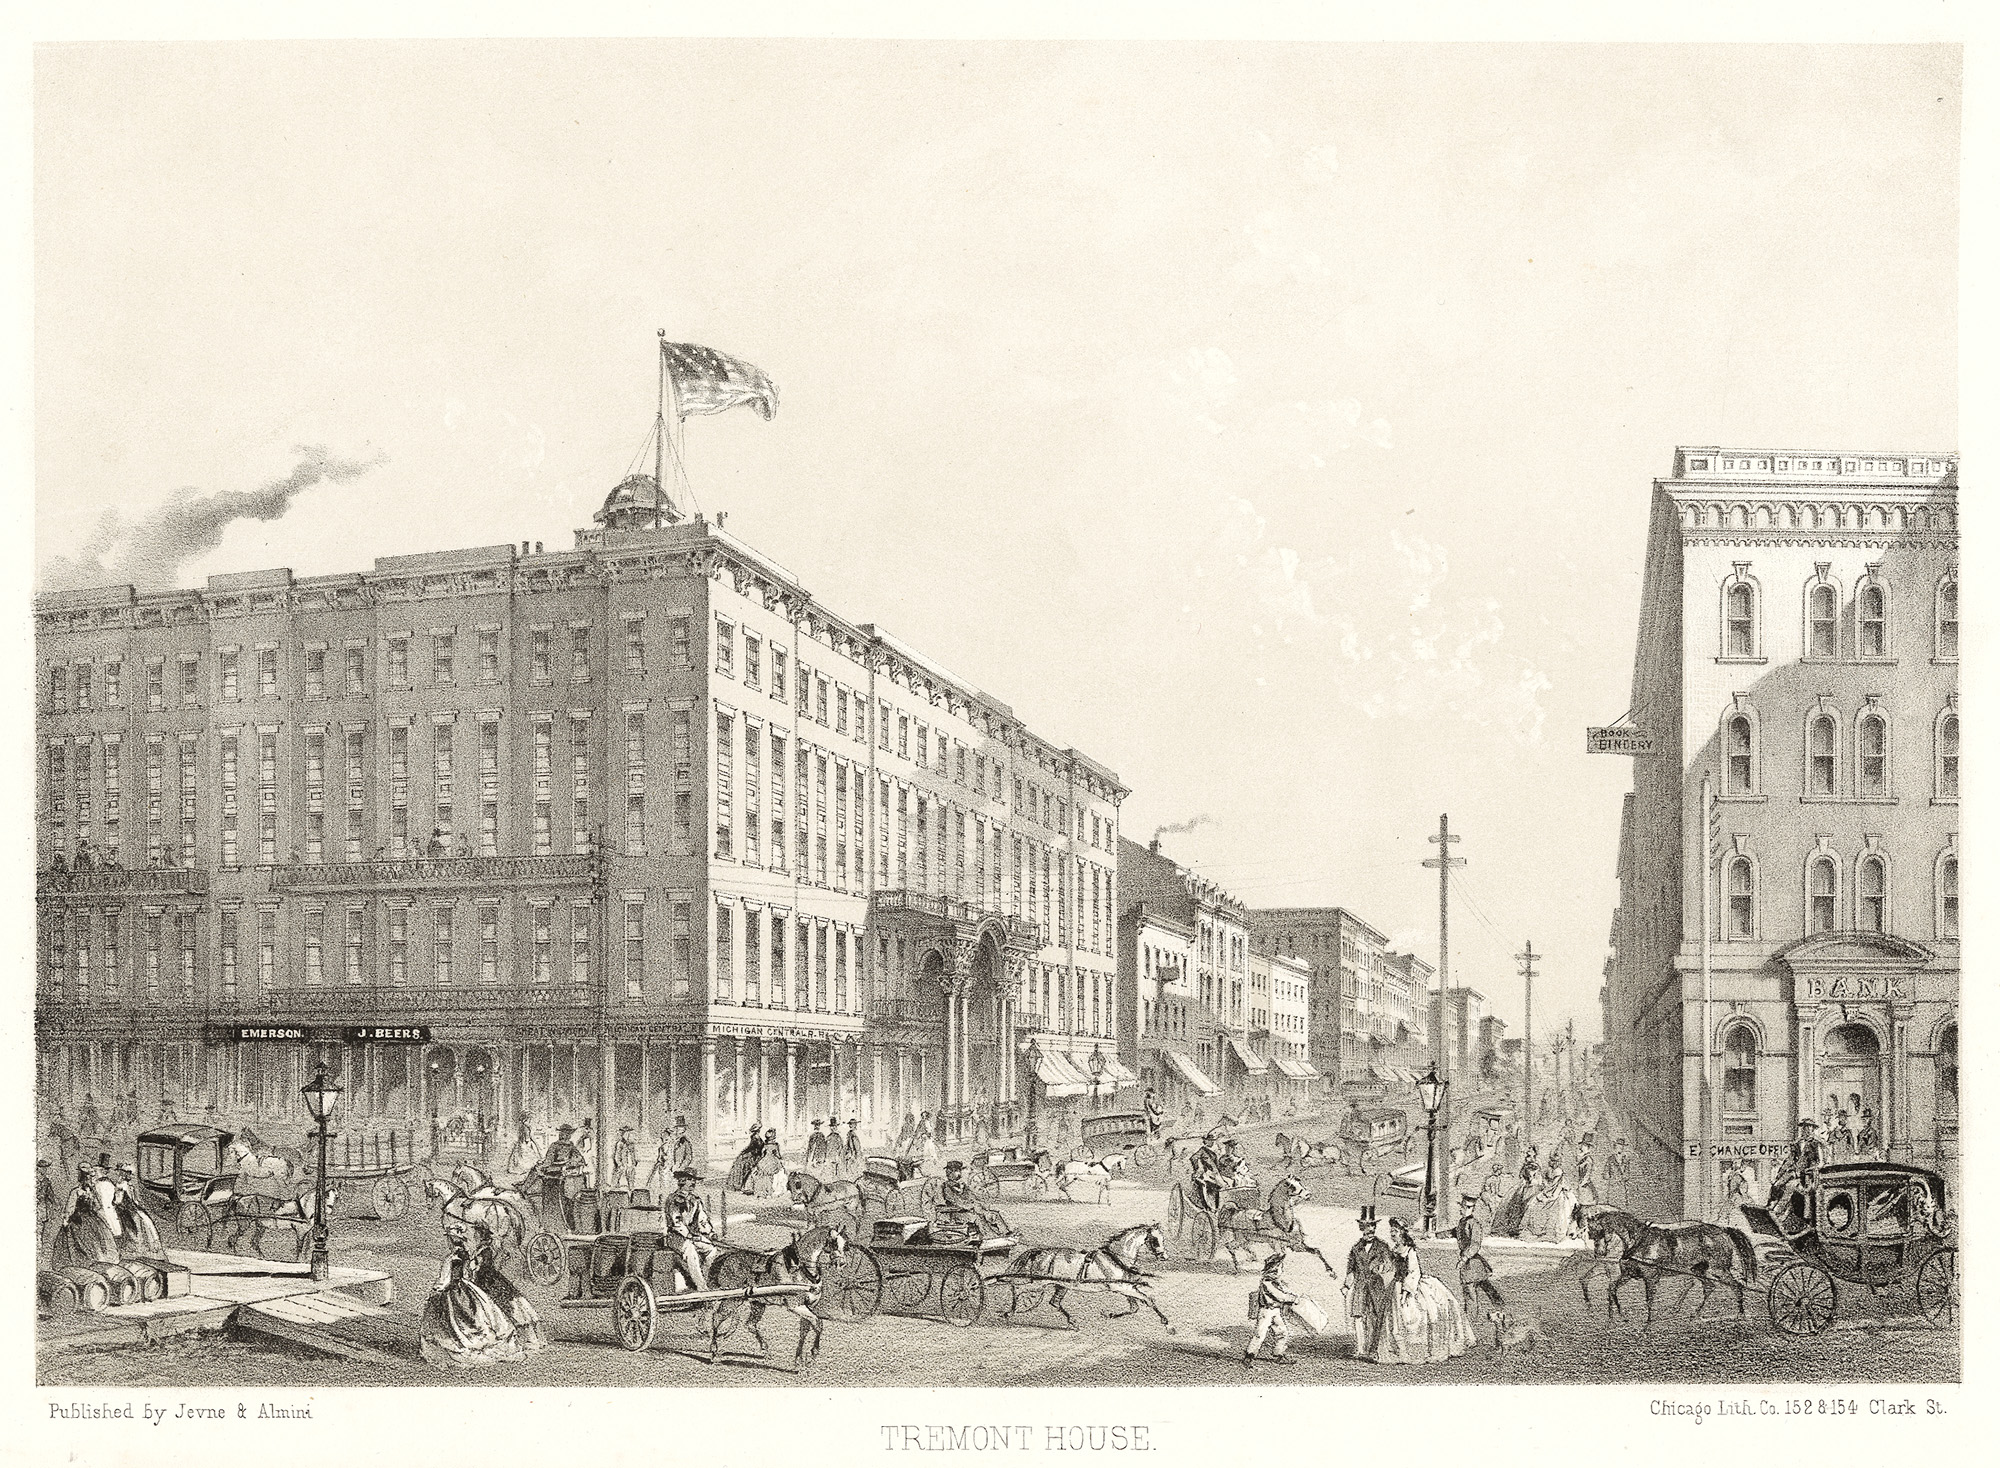 Louis Kurz, Tremont House,1866, lithograph, Chicago Illustrated, 8 3/4 x 11 3/4 inches (Chicago History Museum)